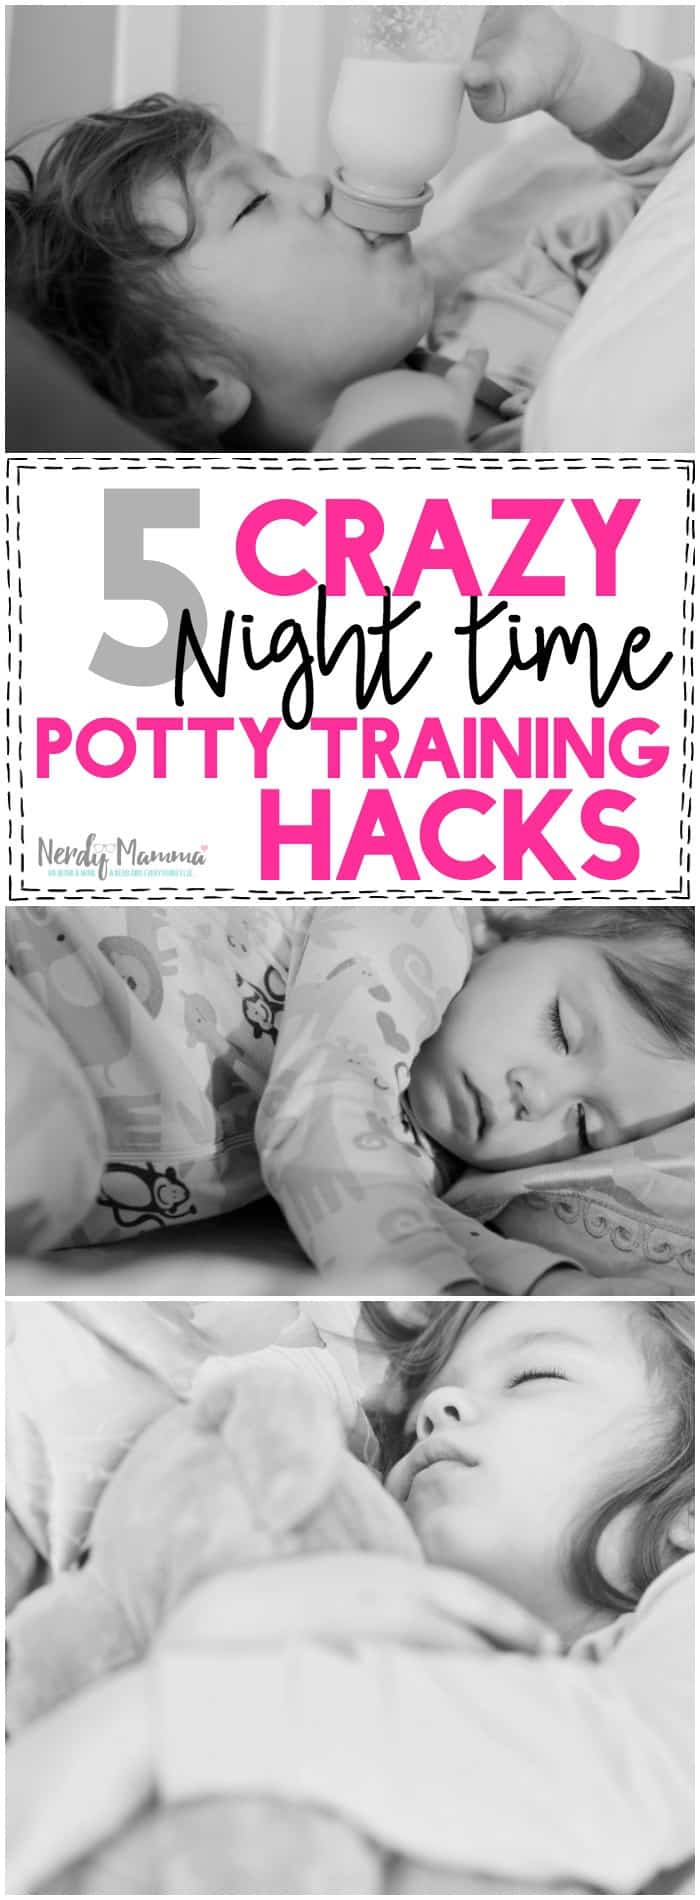 oh-man-this-mom-totally-wins-ms-potty-training-mom-of-the-year-award-two-at-once-i-cant-believe-she-doesnt-have-more-than-these-5-crazy-nighttime-potty-training-hacks-lol